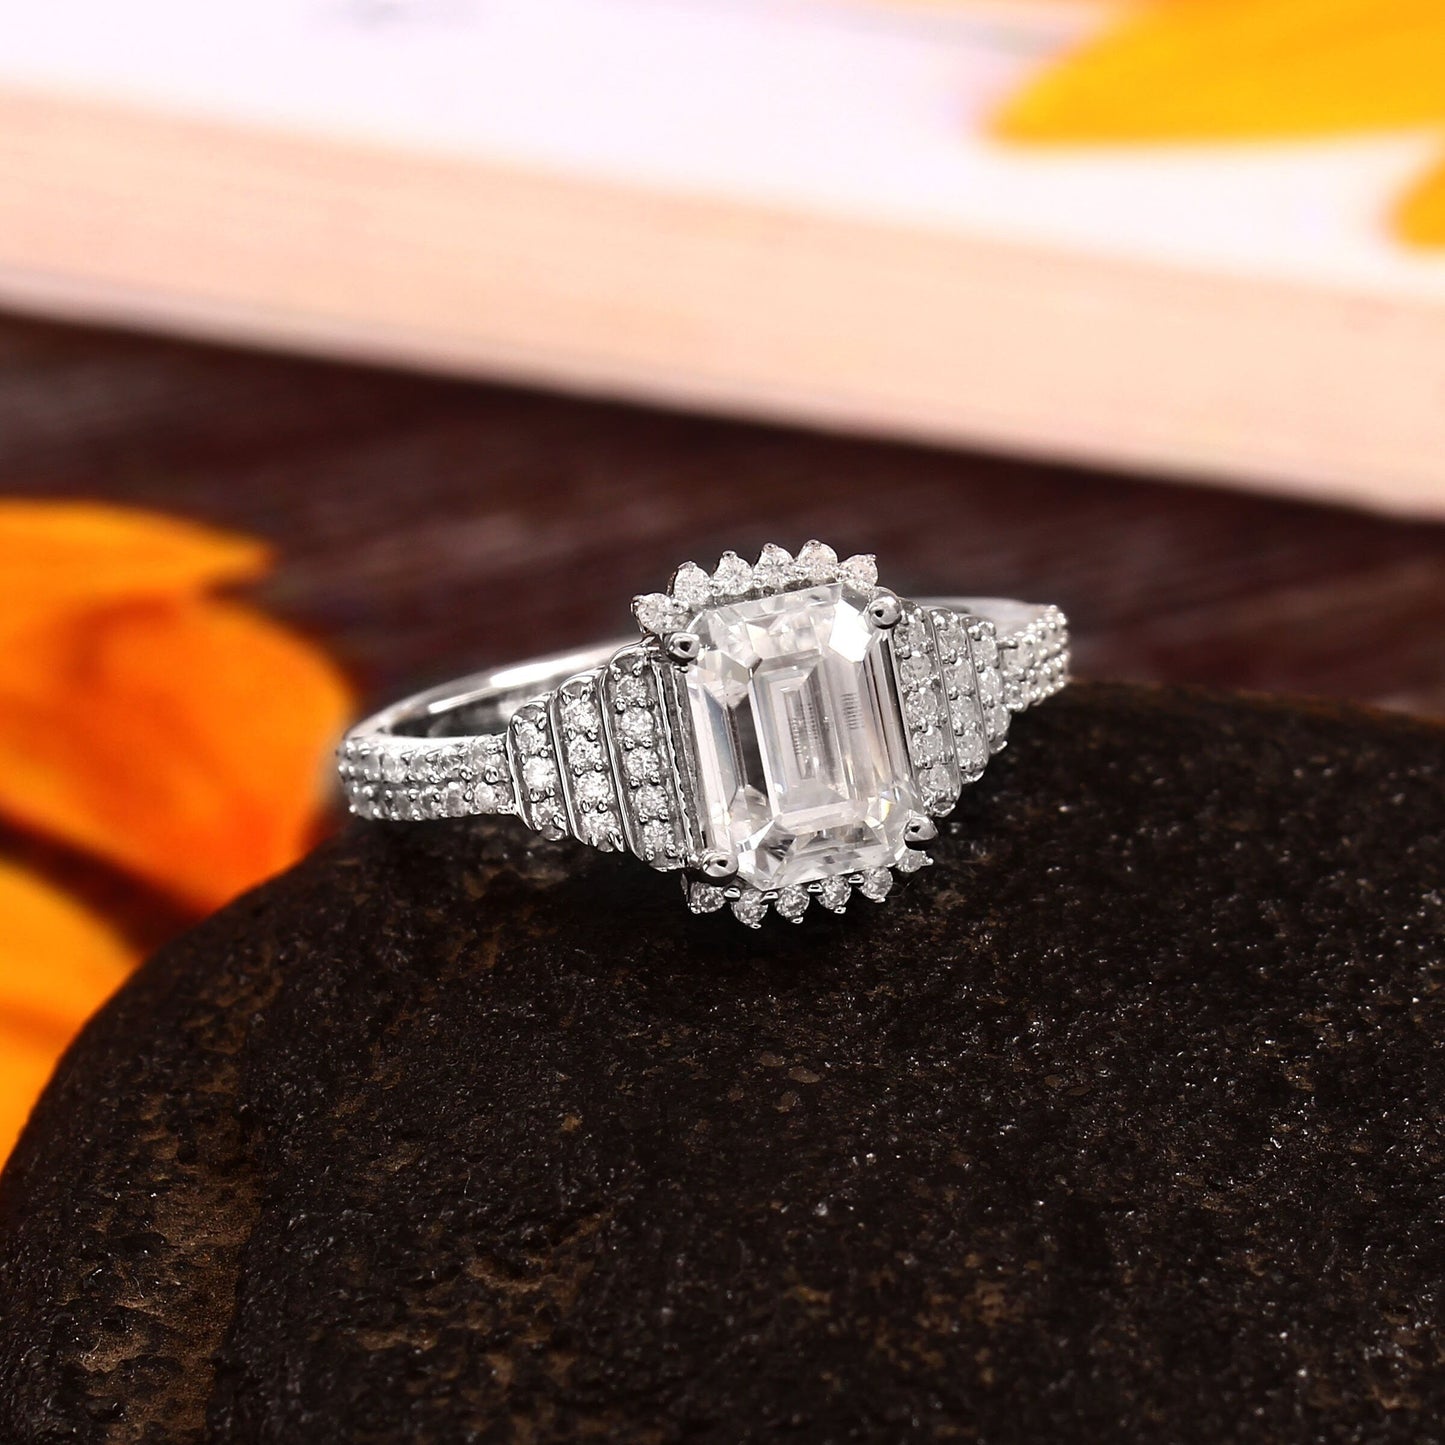 Emerald cut Solitaire Diamond Ring with layered shank